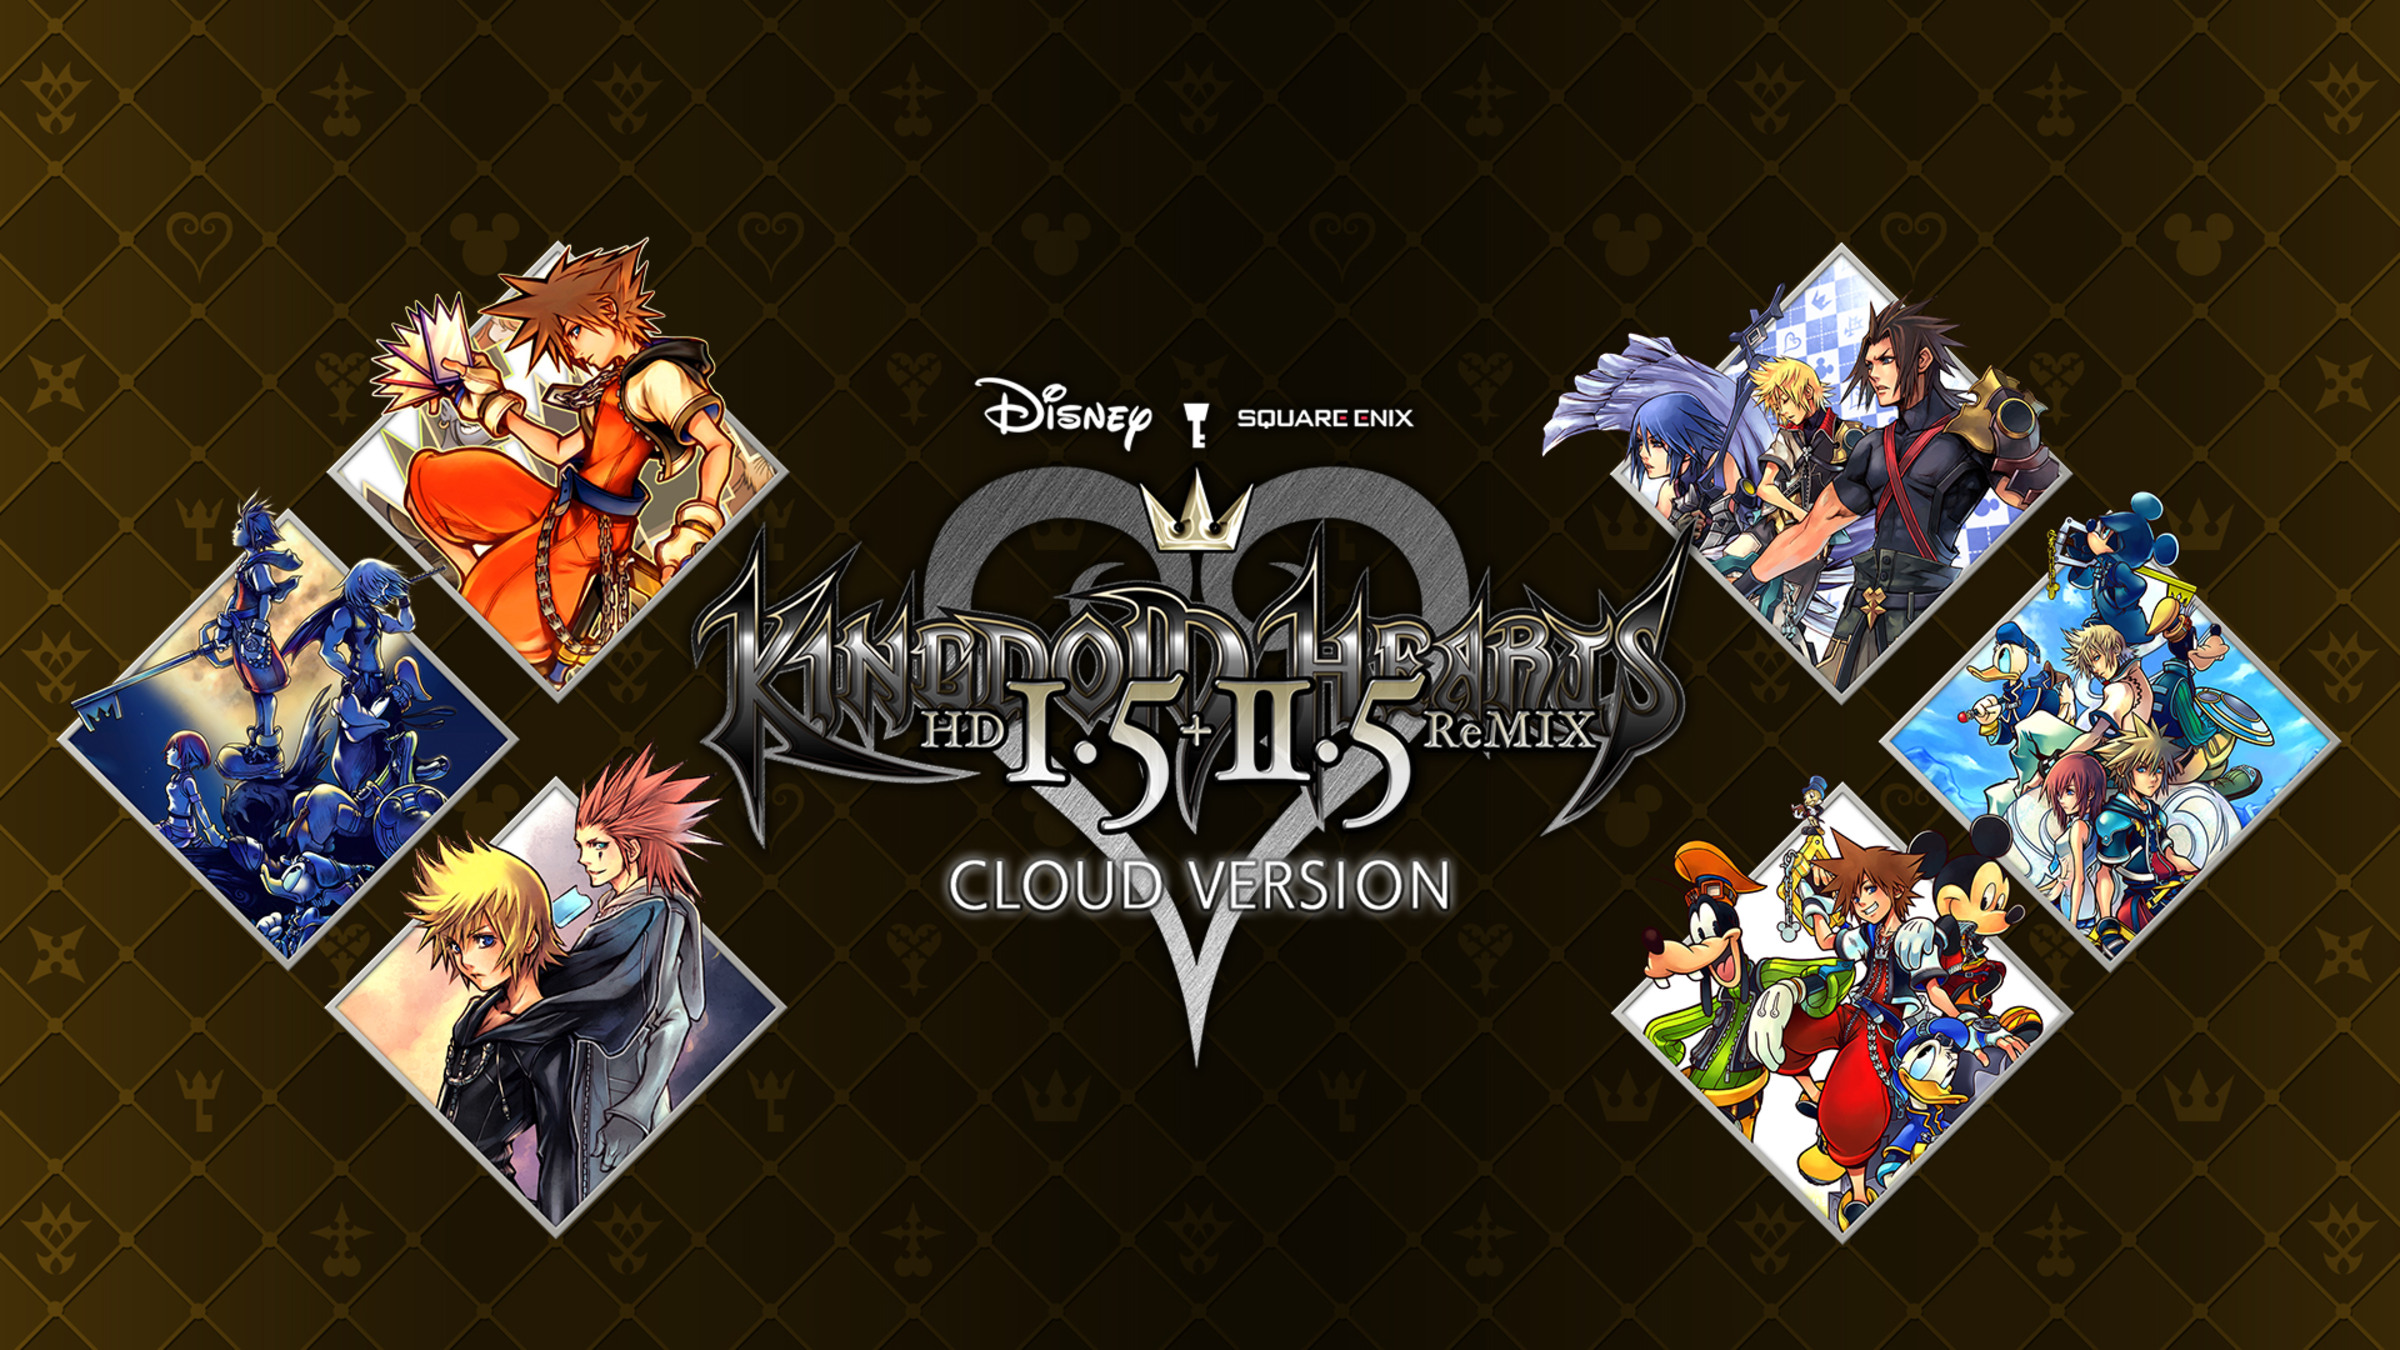 When does the Kingdom Hearts series come out?